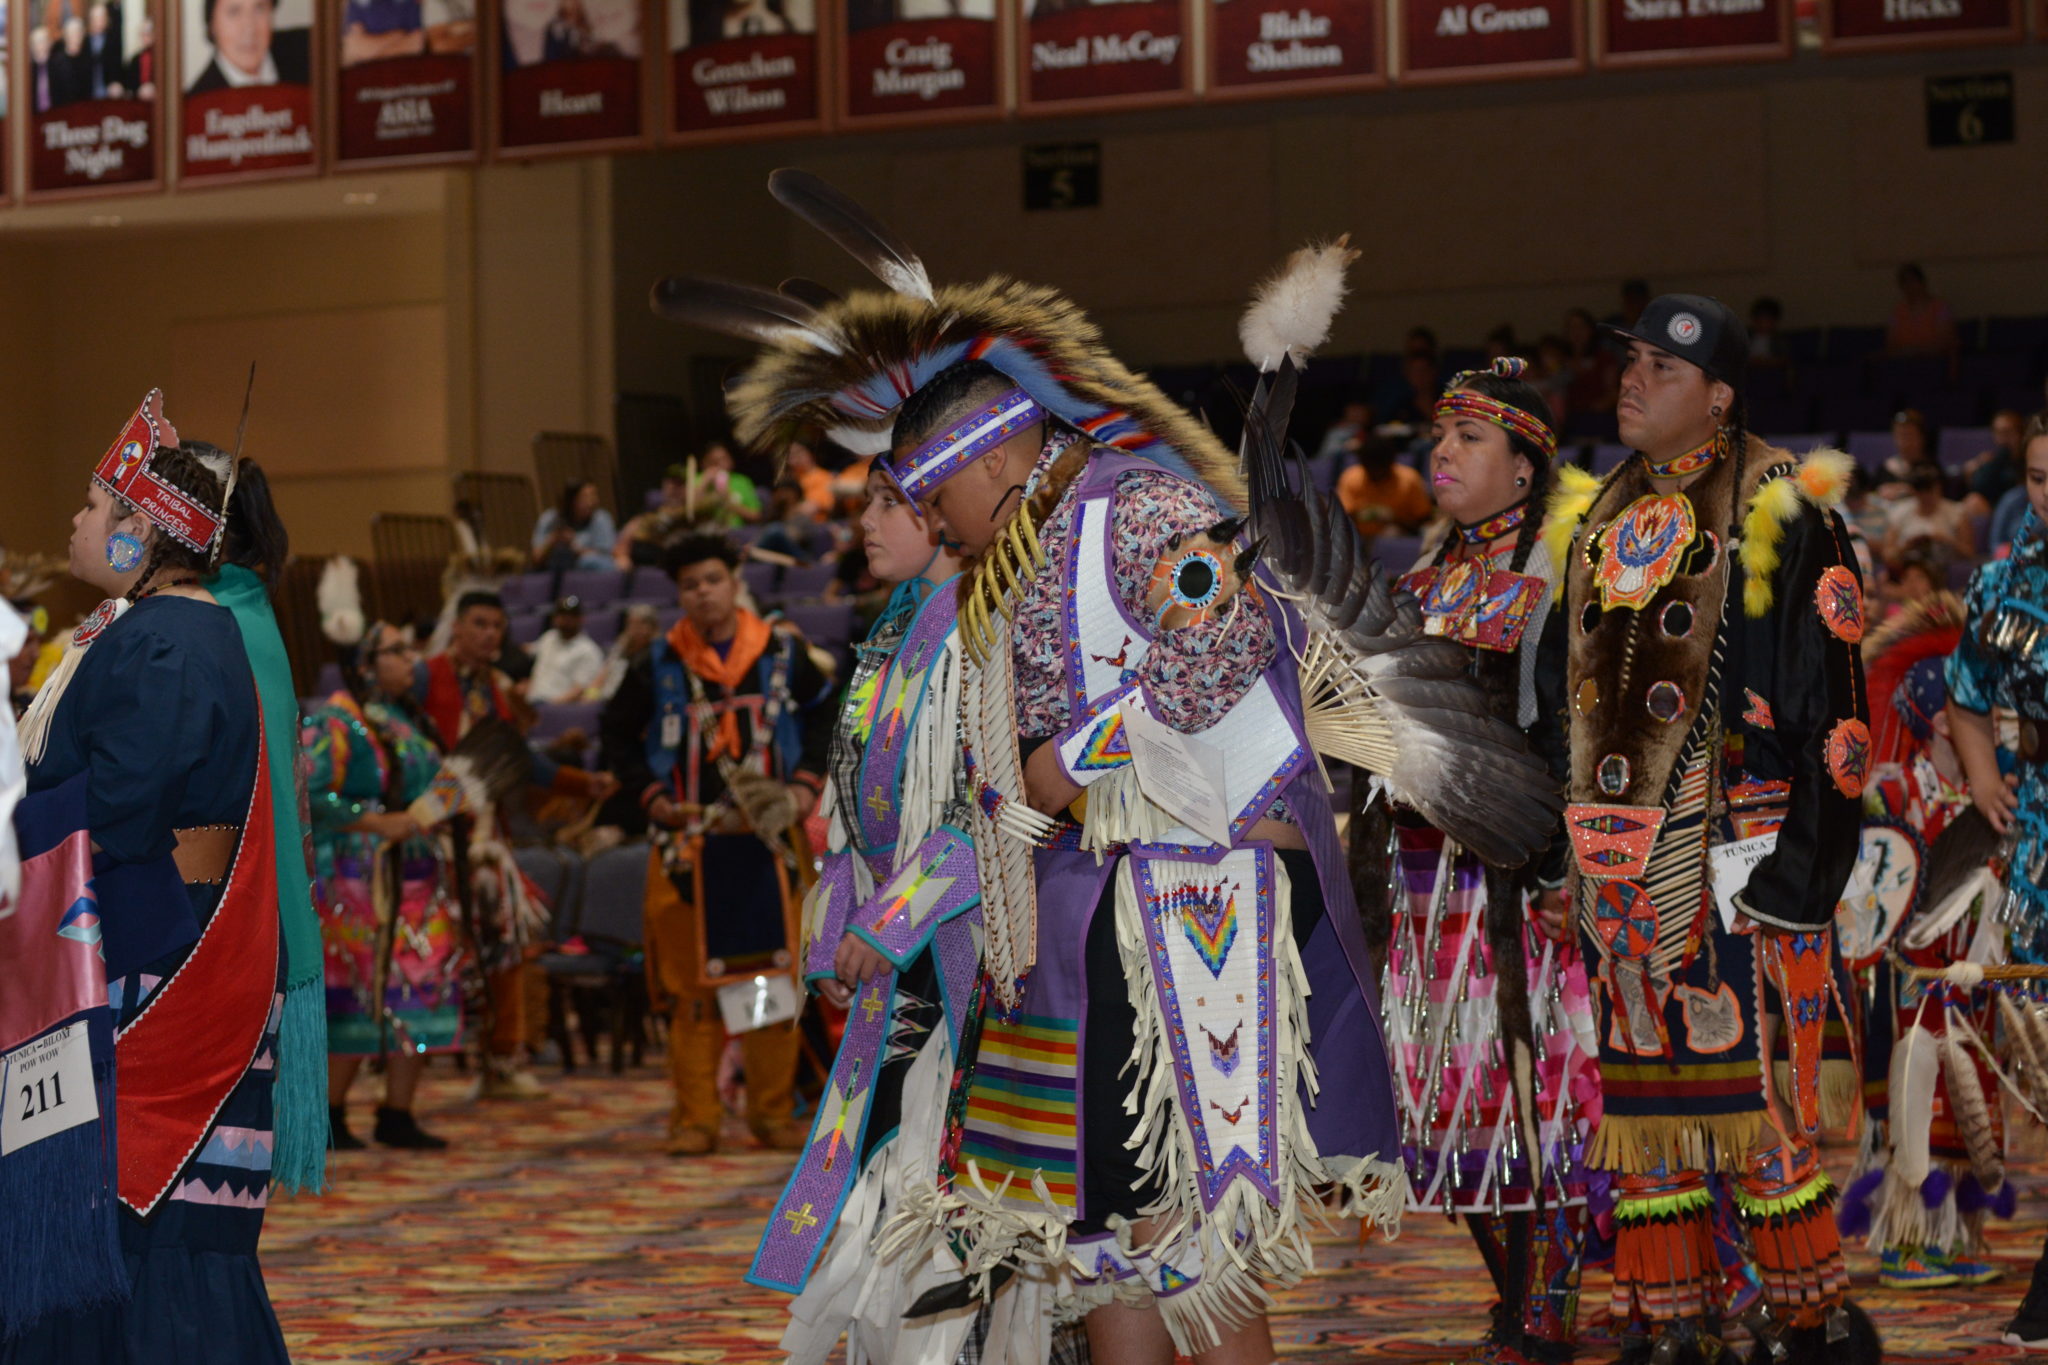 clearwater river casino pow wow 2019